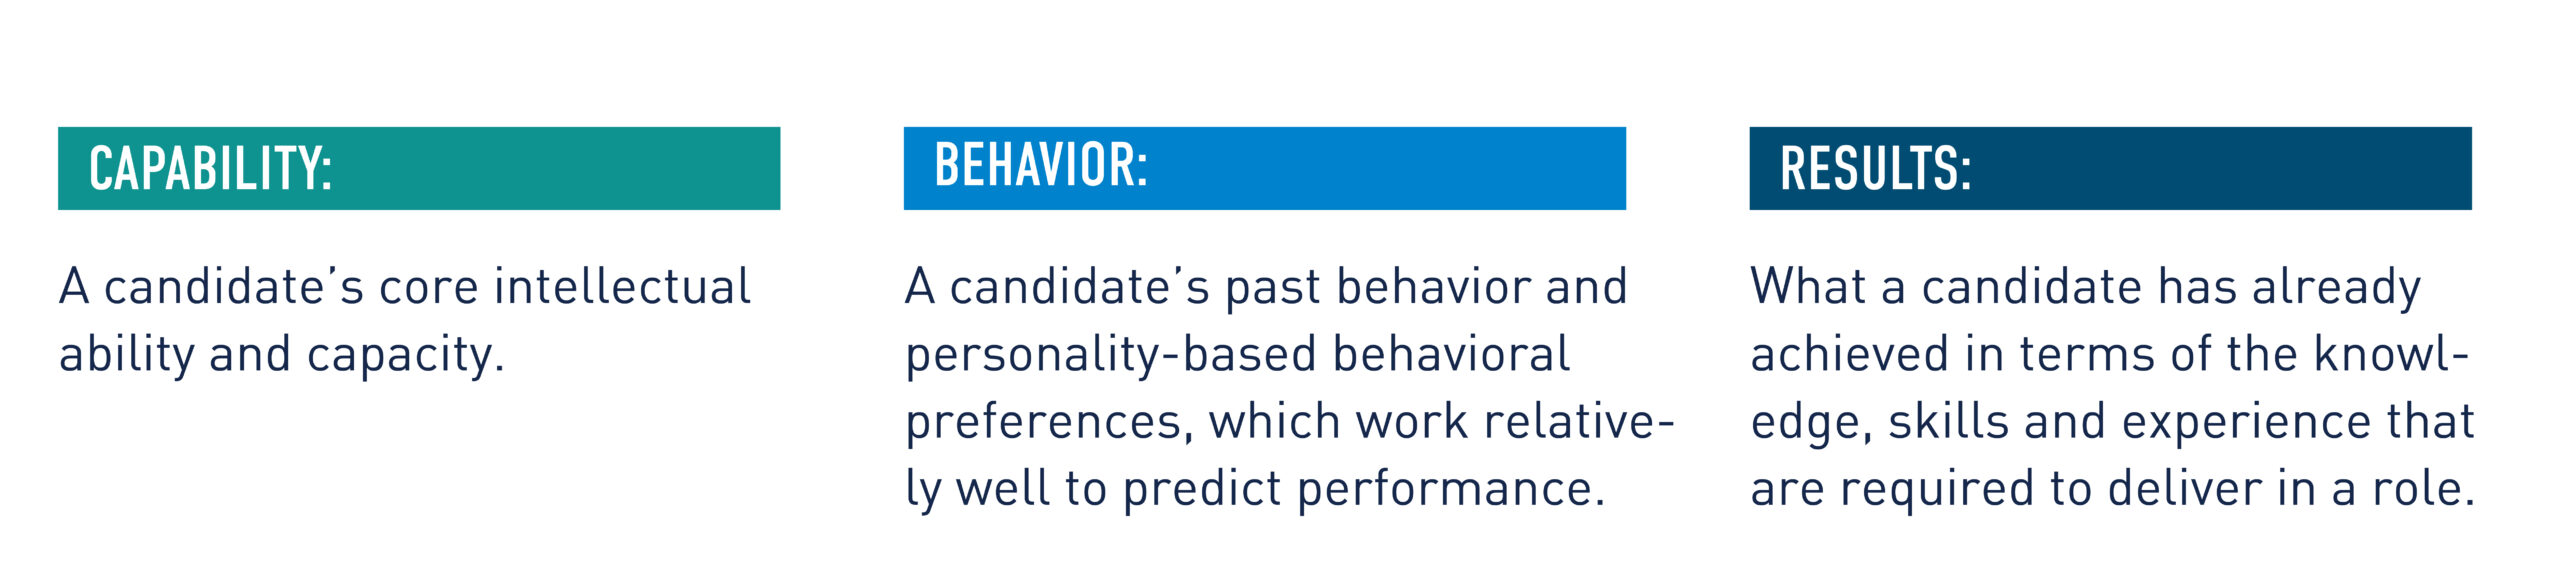 Capability: A candidate’s core intellectual ability and capacity.
Behavior:A candidate’s past behavior and personality-based behavioral preferences, which work relatively well to predict performance.
Results:What a candidate has already achieved in terms of the knowledge, skills and experience that are required to deliver in a role.